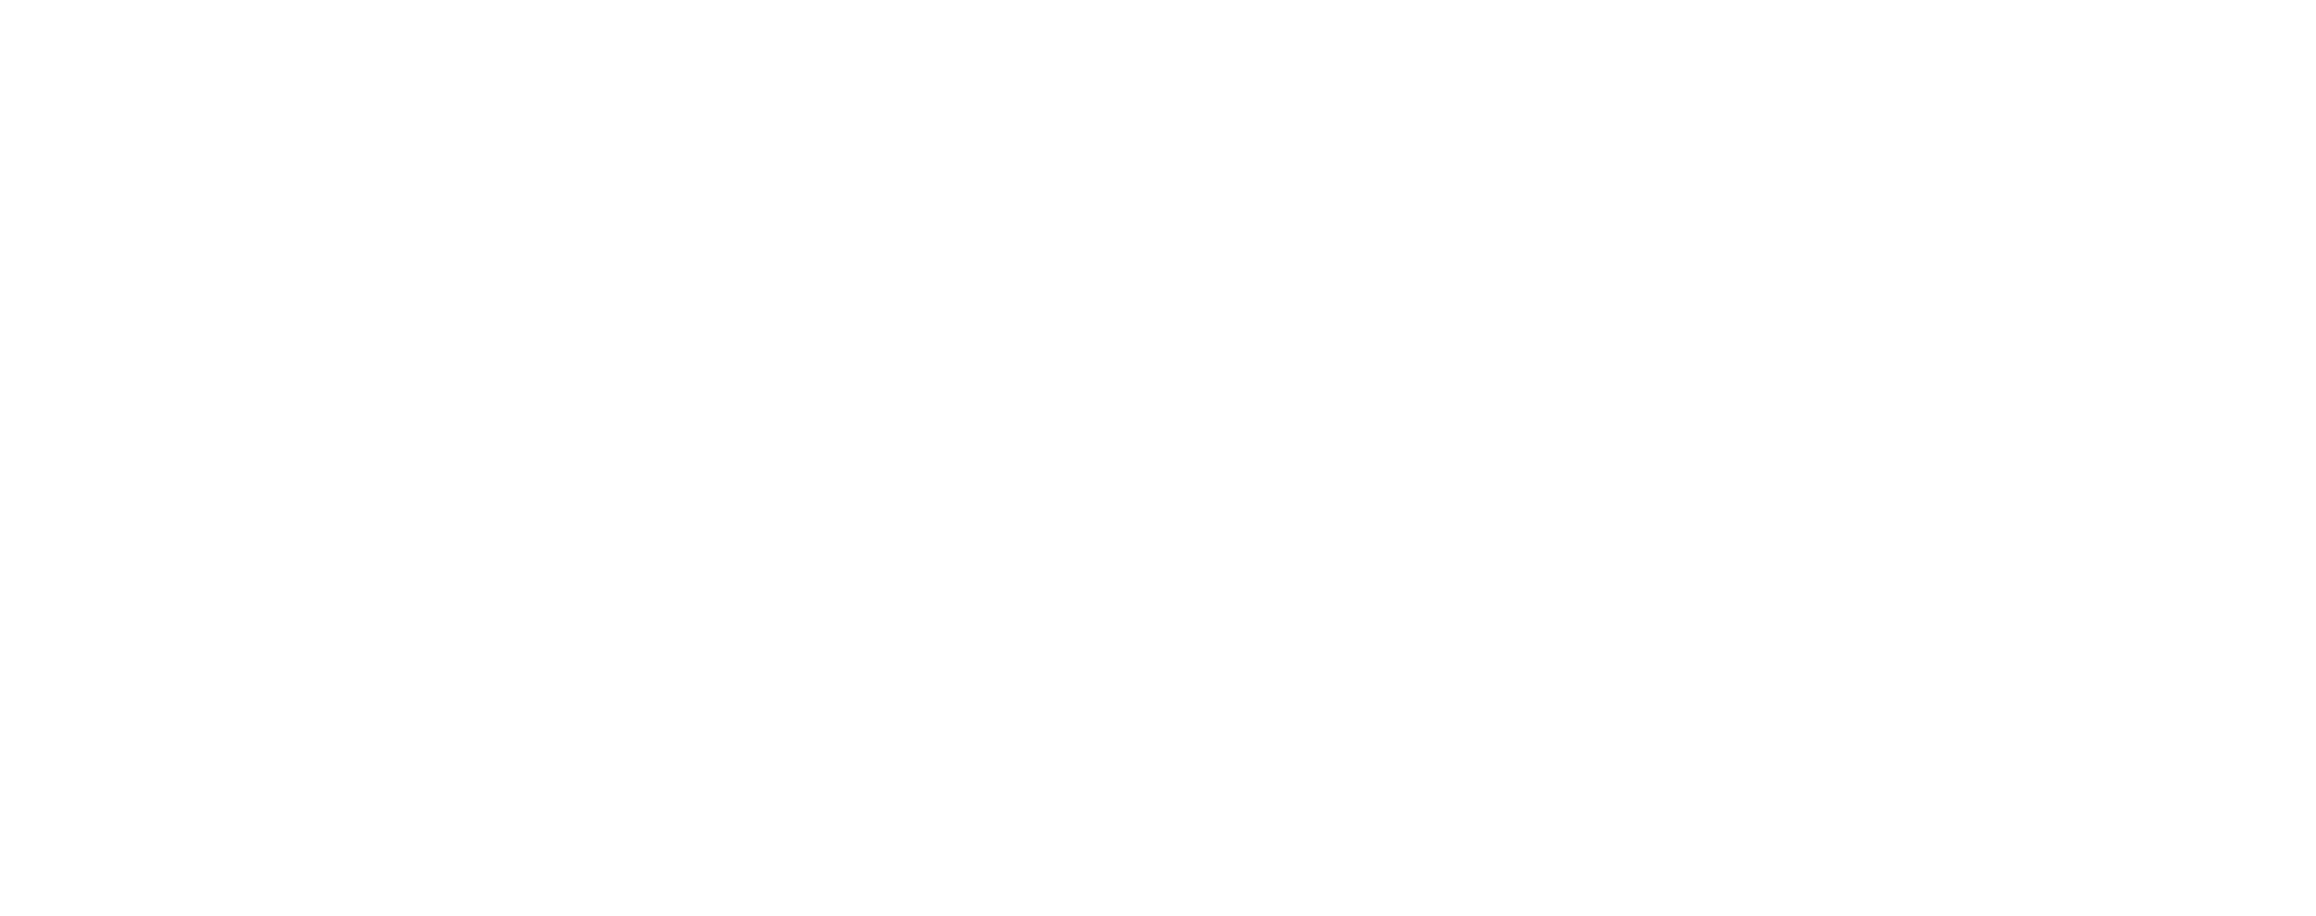 ACOEP 2023 scientific assembly — general sessions self-study course